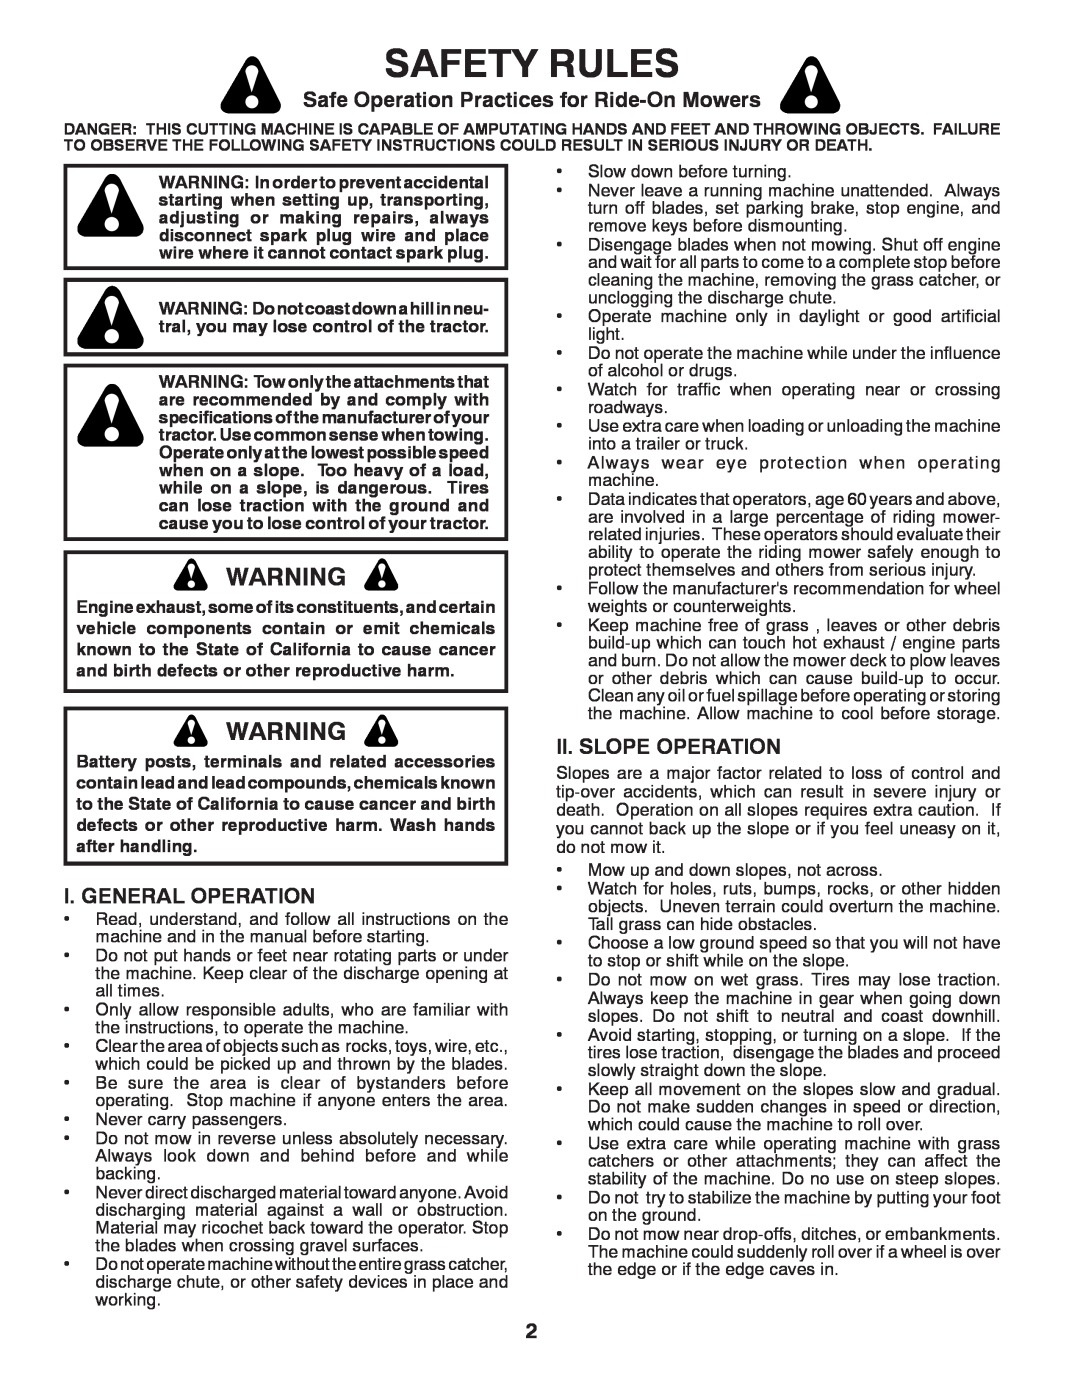 Poulan 96012010900 Safety Rules, Safe Operation Practices for Ride-On Mowers, I. General Operation, Ii. Slope Operation 